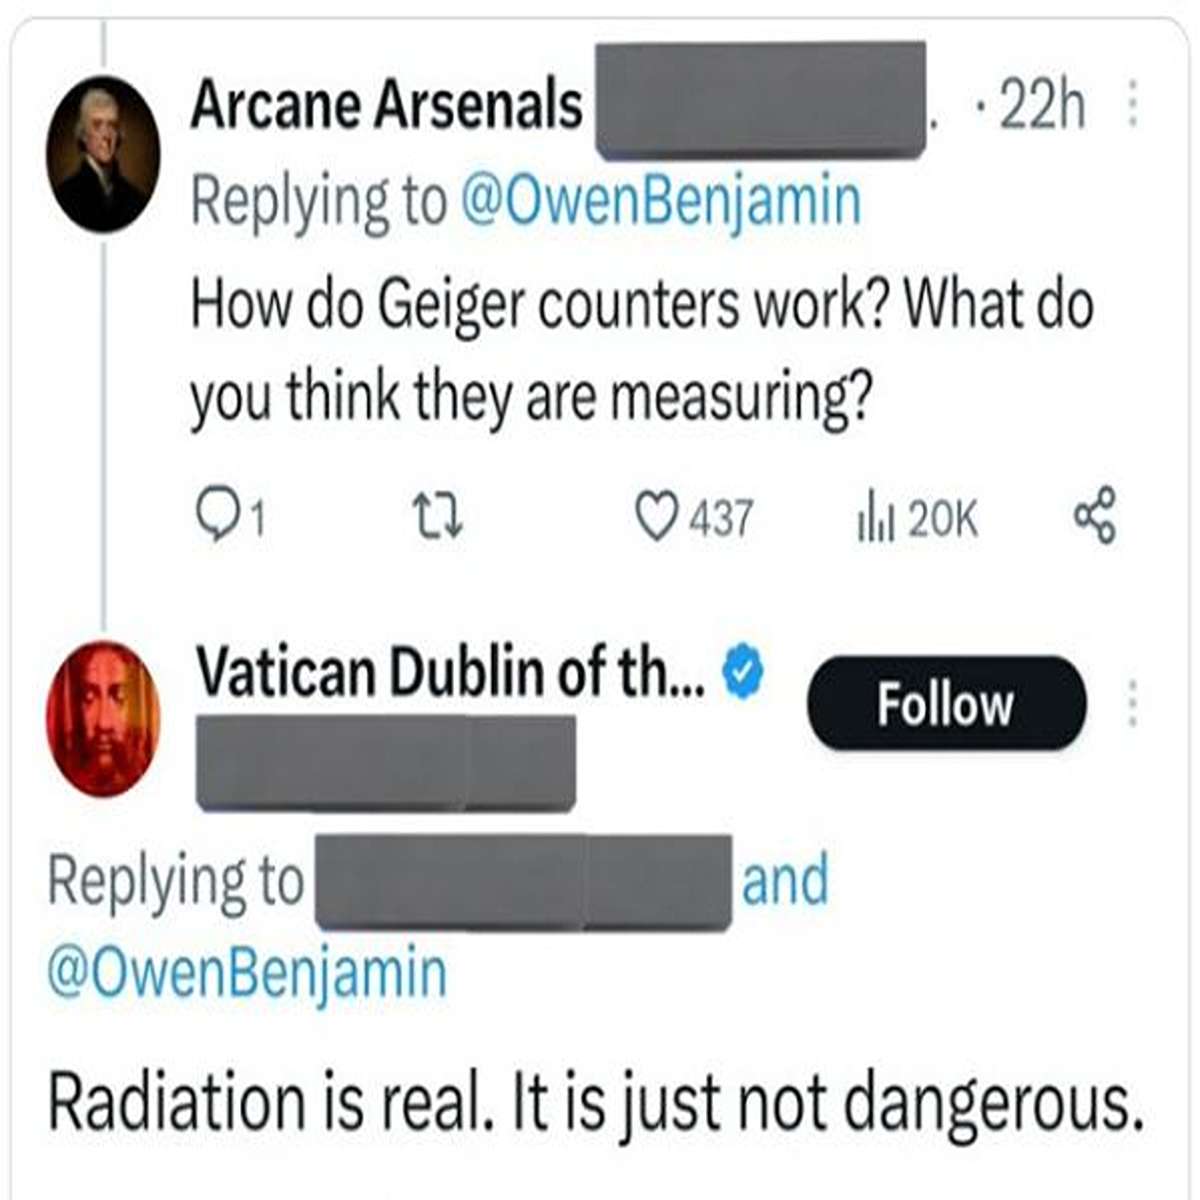 delusional people - multimedia - Arcane Arsenals Benjamin How do Geiger counters work? What do you think they are measuring? Q1 17 437 Vatican Dublin of th... 22h and 20K % Radiation is real. It is just not dangerous.